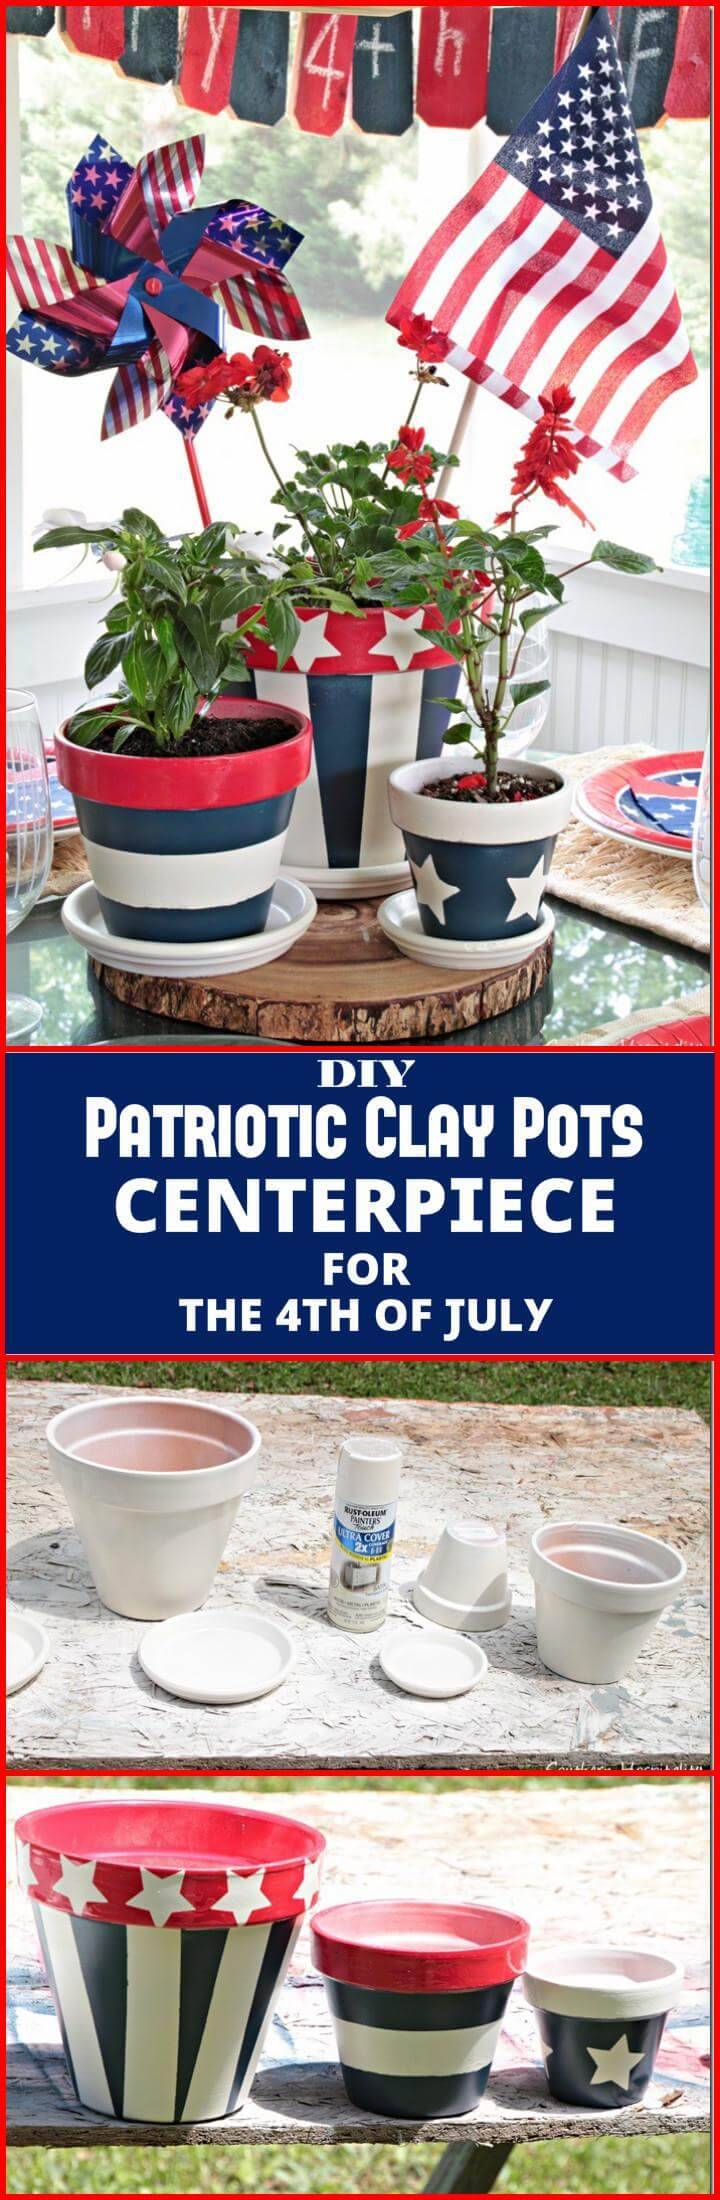 handmade patriotic clay pots centerpiece for 4th July